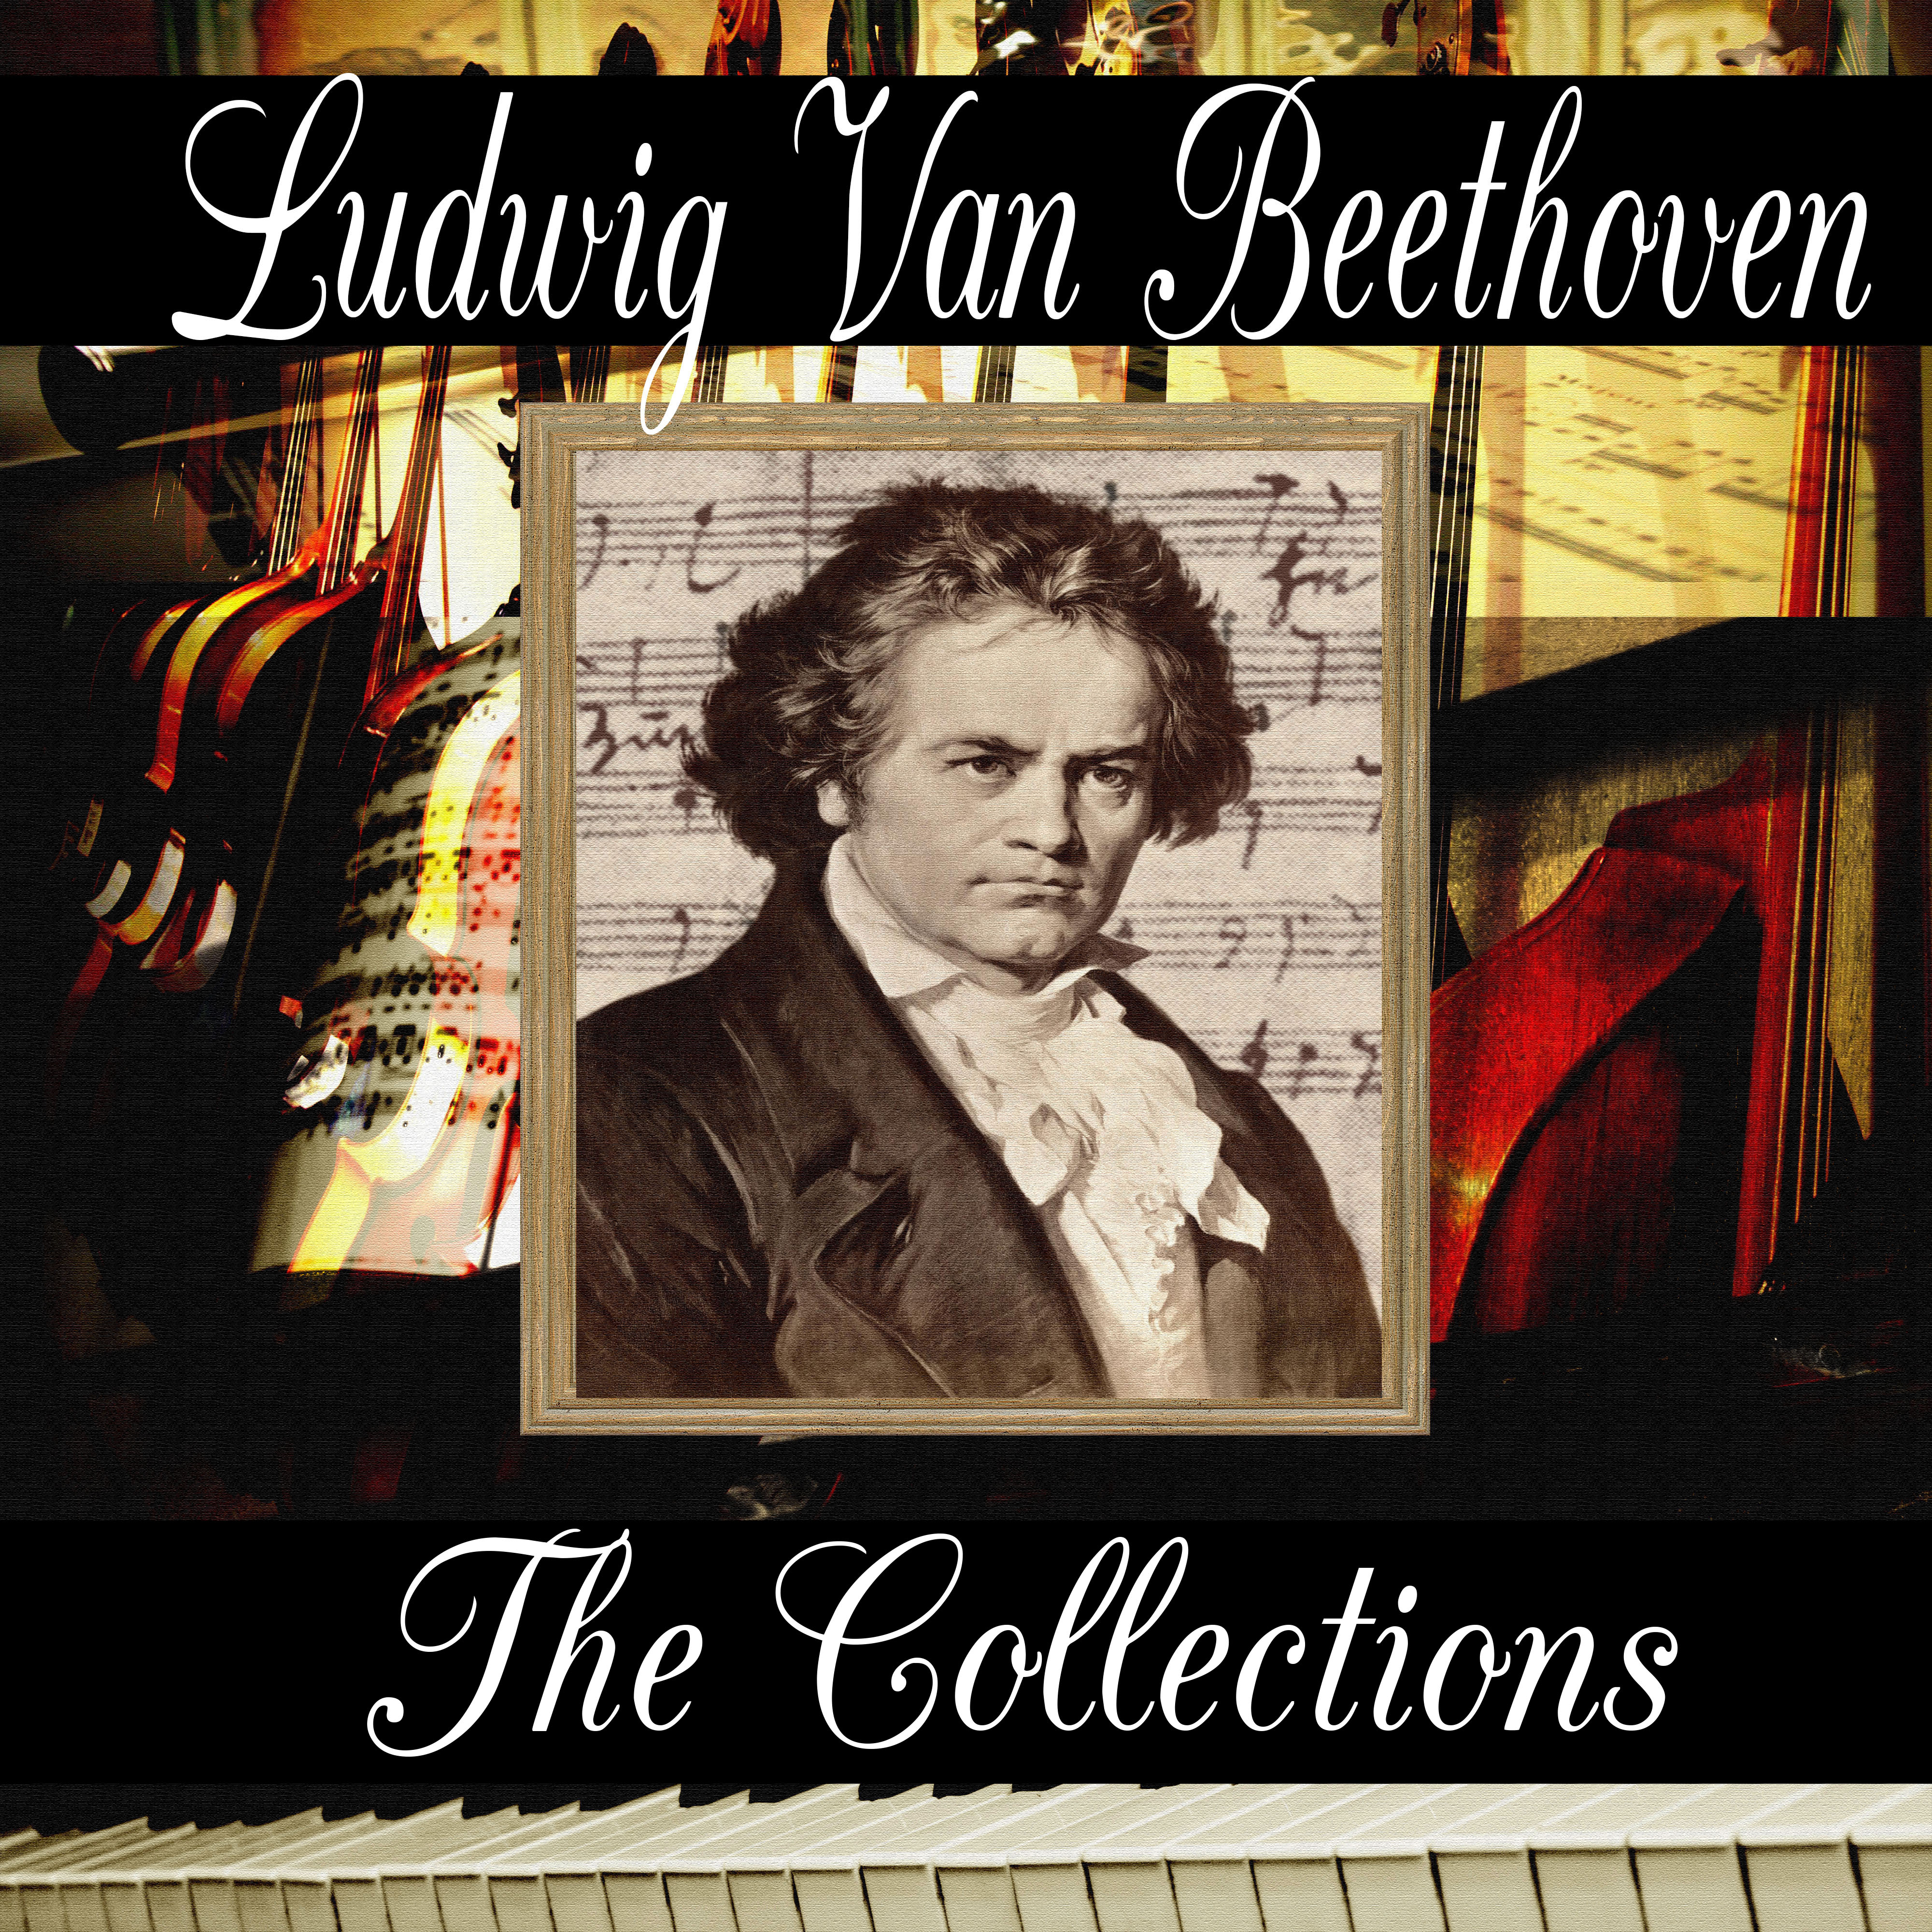 Ludwig van Beethoven: The Collection